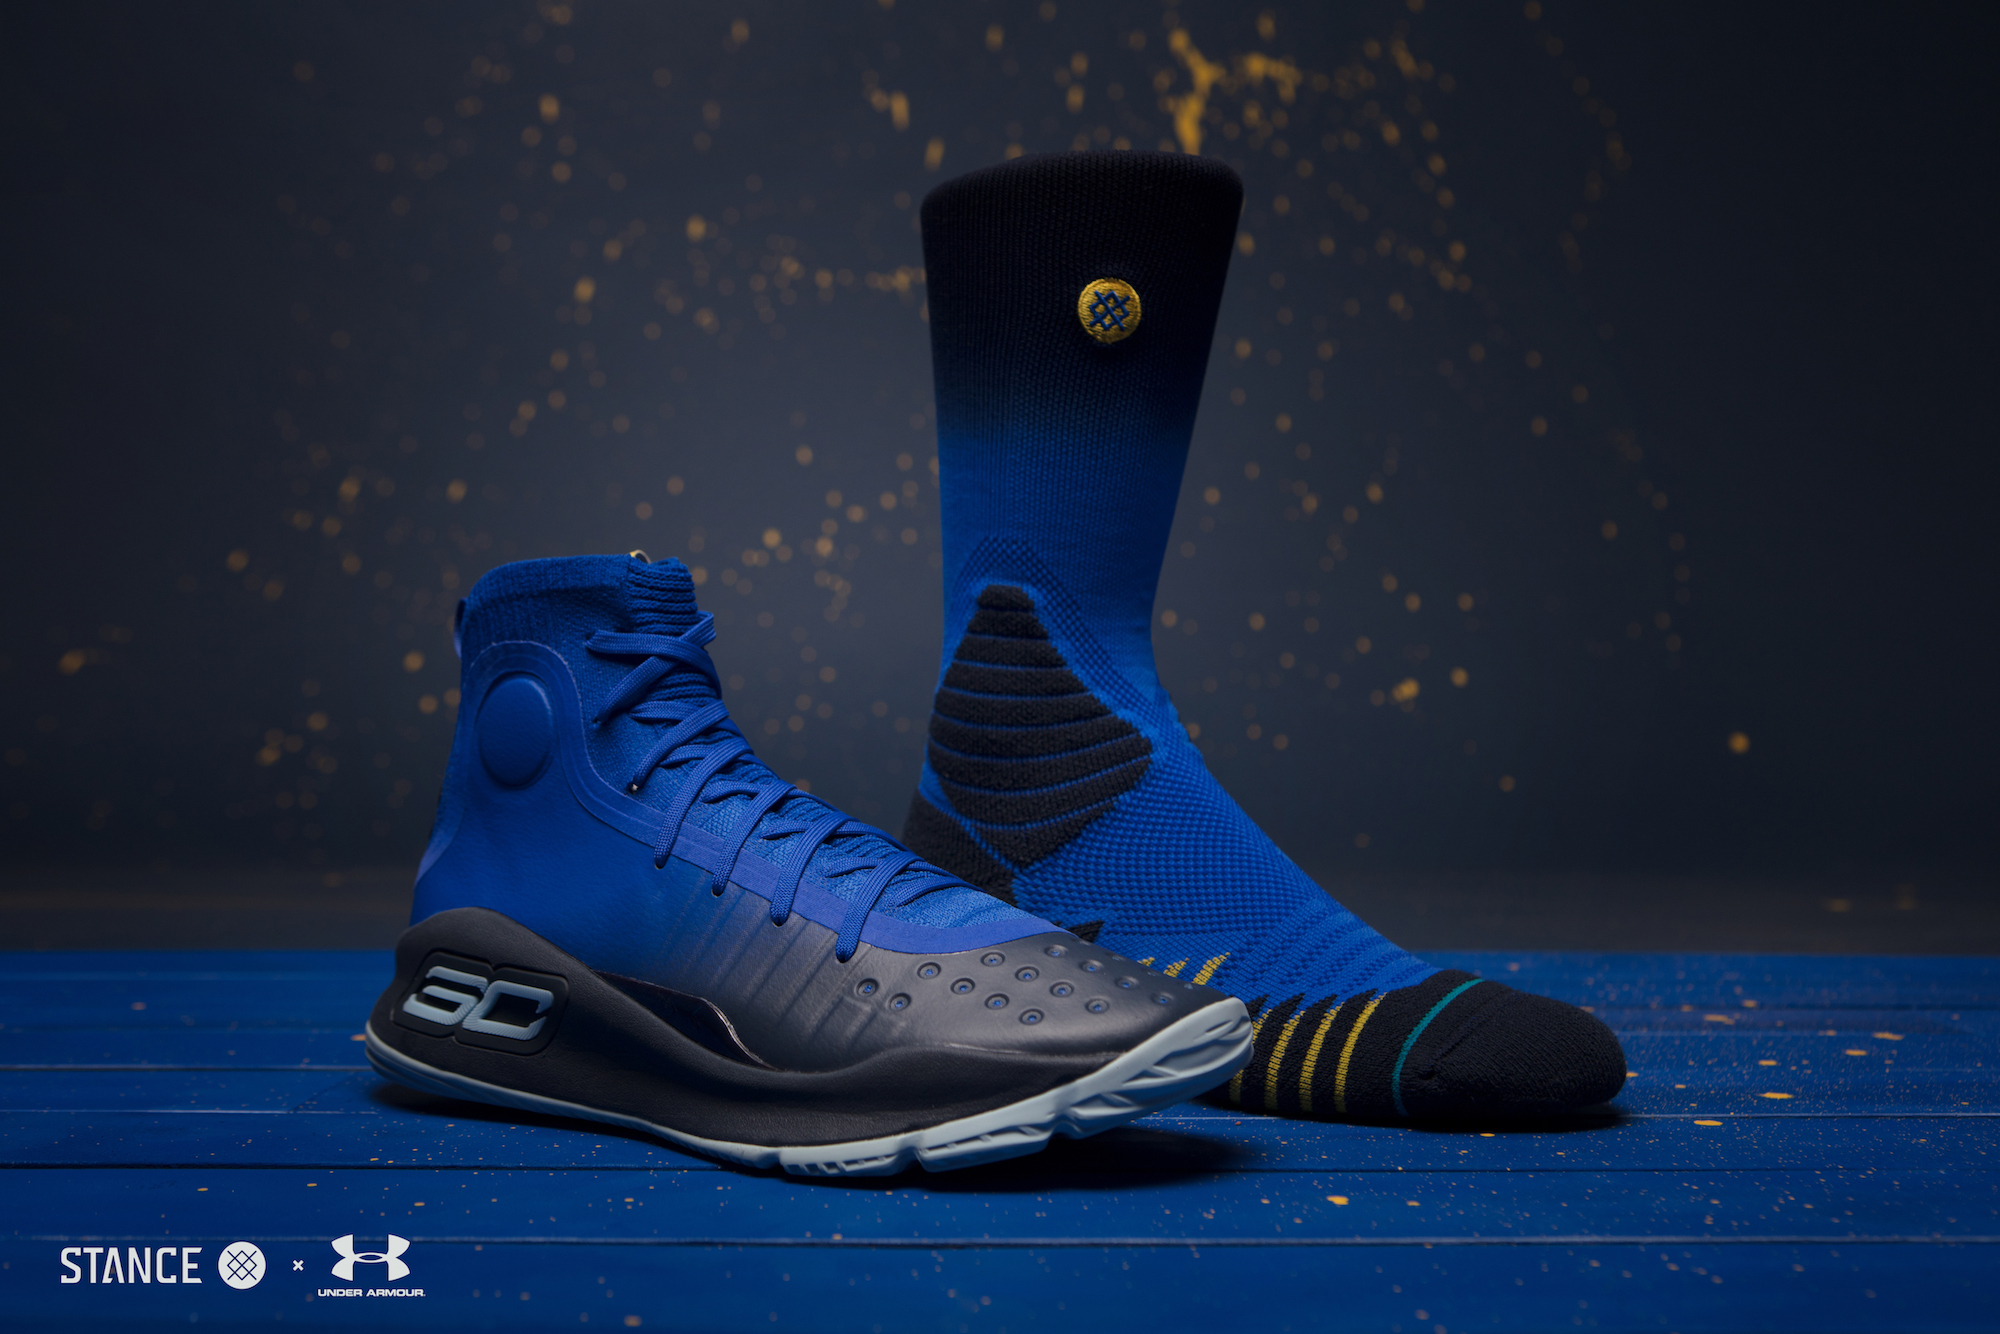 under armour Stance x Curry 4 Capsule socks 3